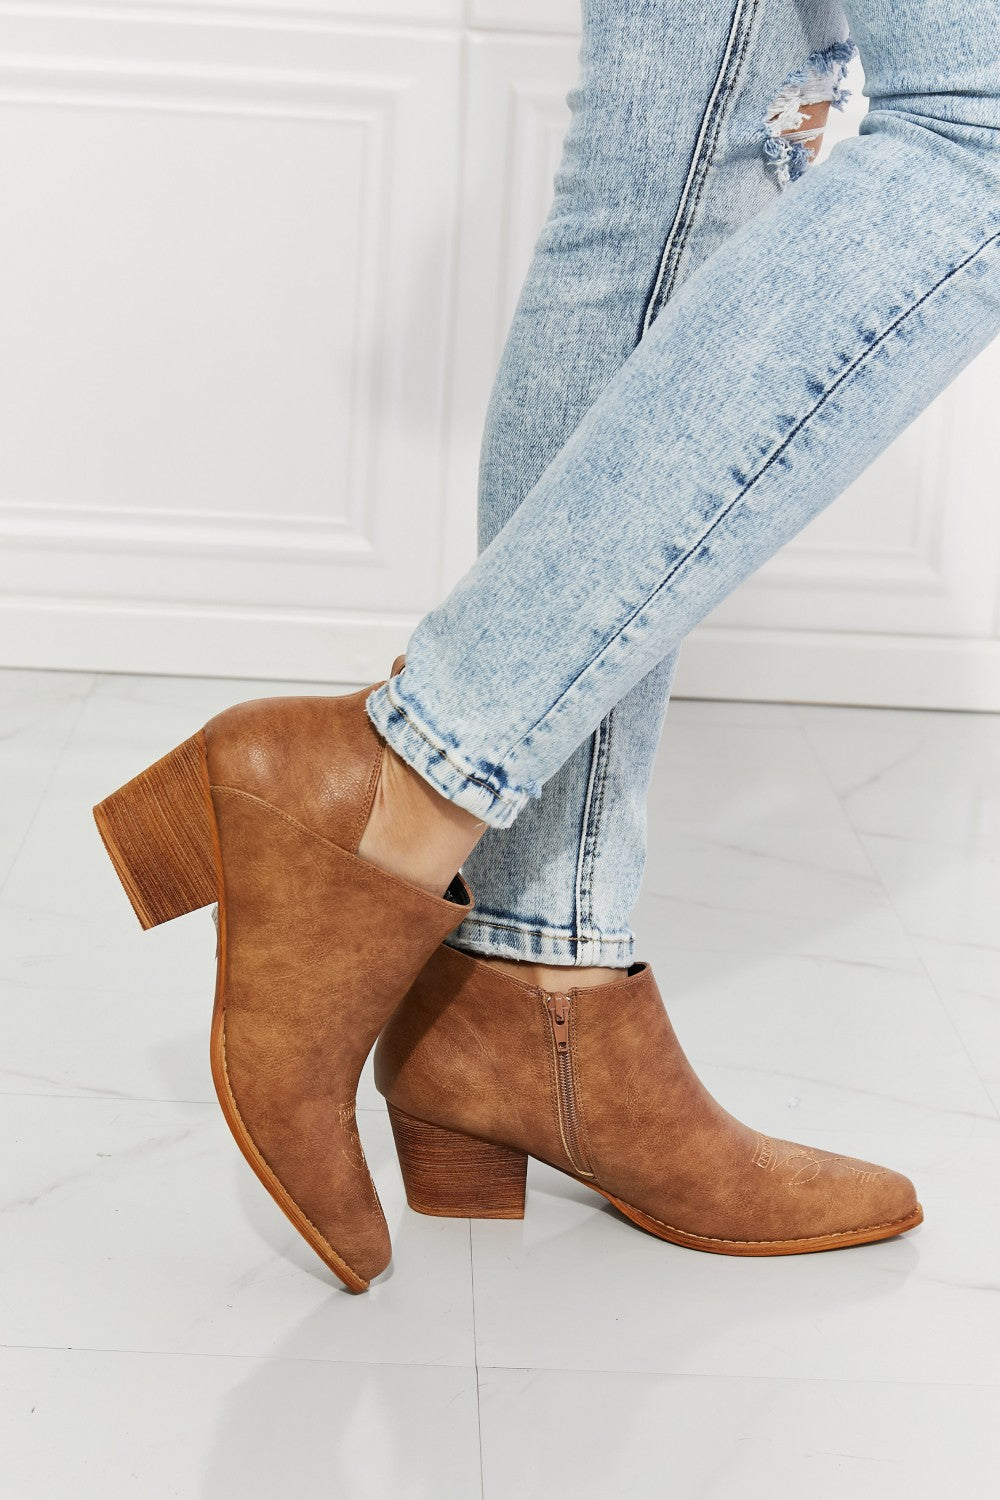 MMShoes Trust Yourself Embroidered Crossover Cowboy Bootie in Caramel - AllIn Computer